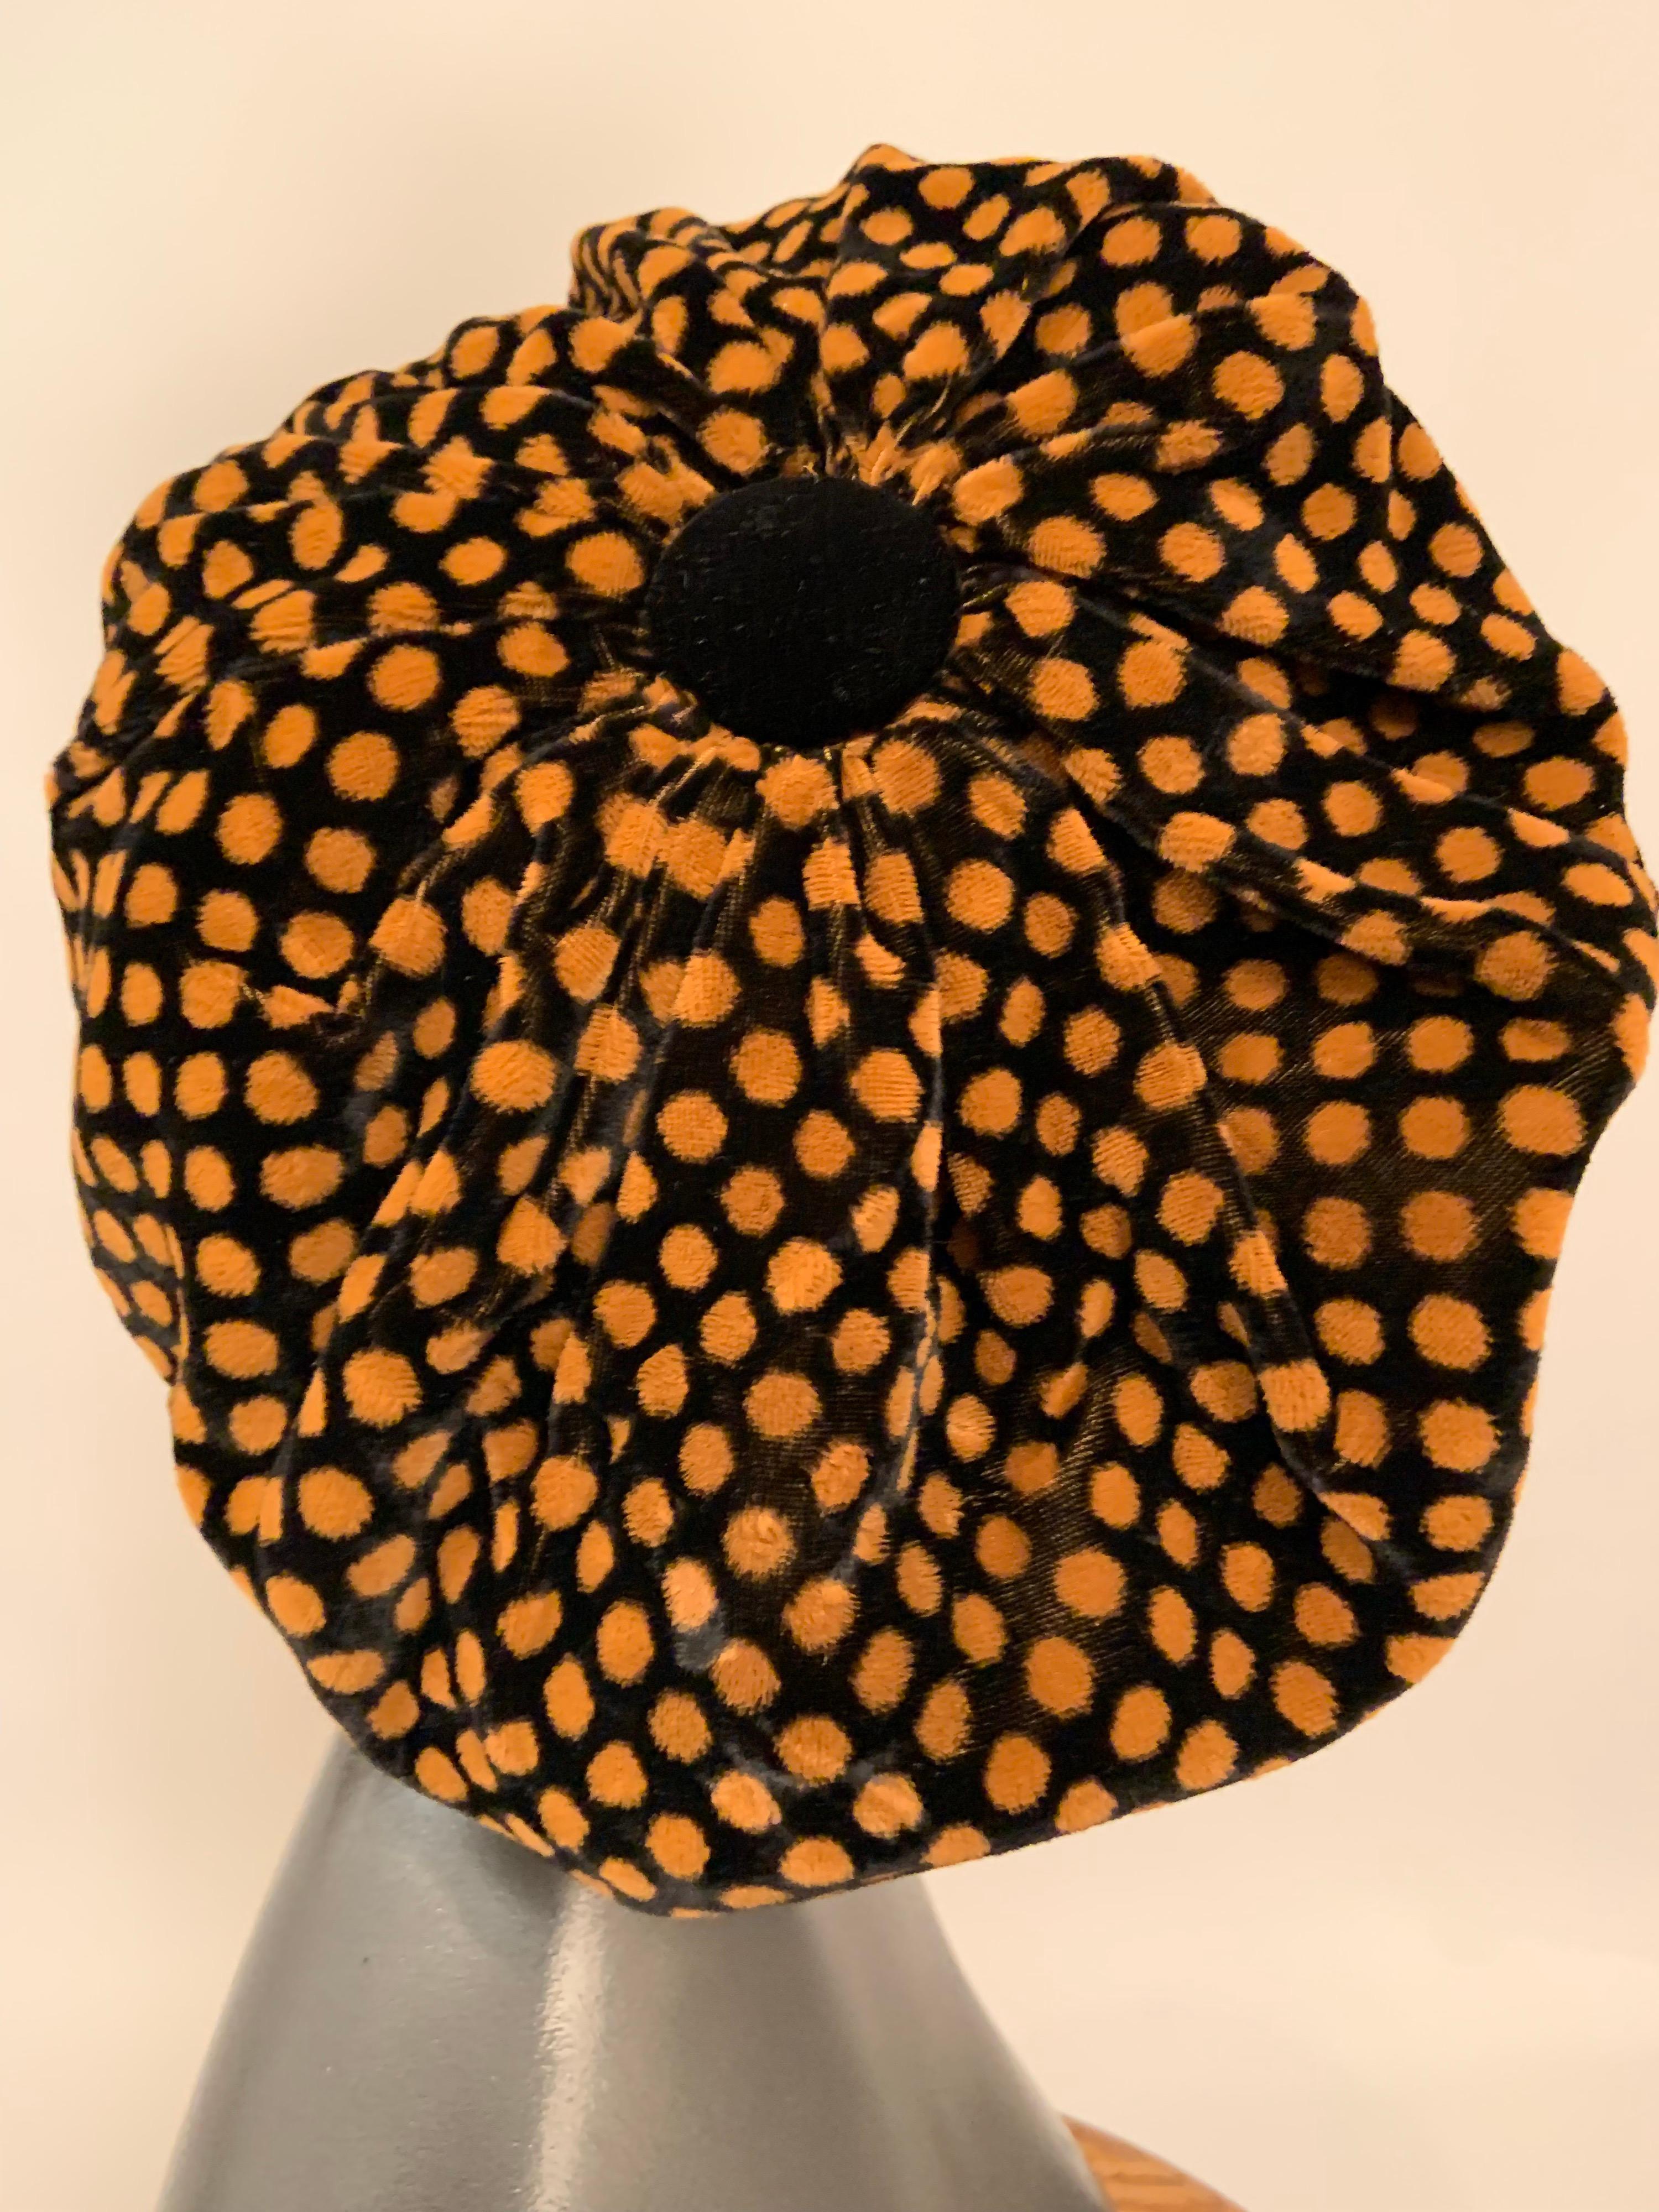 Famed New York Times photographer Bill Cunningham designed hats before He picked up his camera. This soft black velvet hat with mocha colored polka dots drapes over the black velvet brim of this oversized newsboy cap. A large black velvet button top